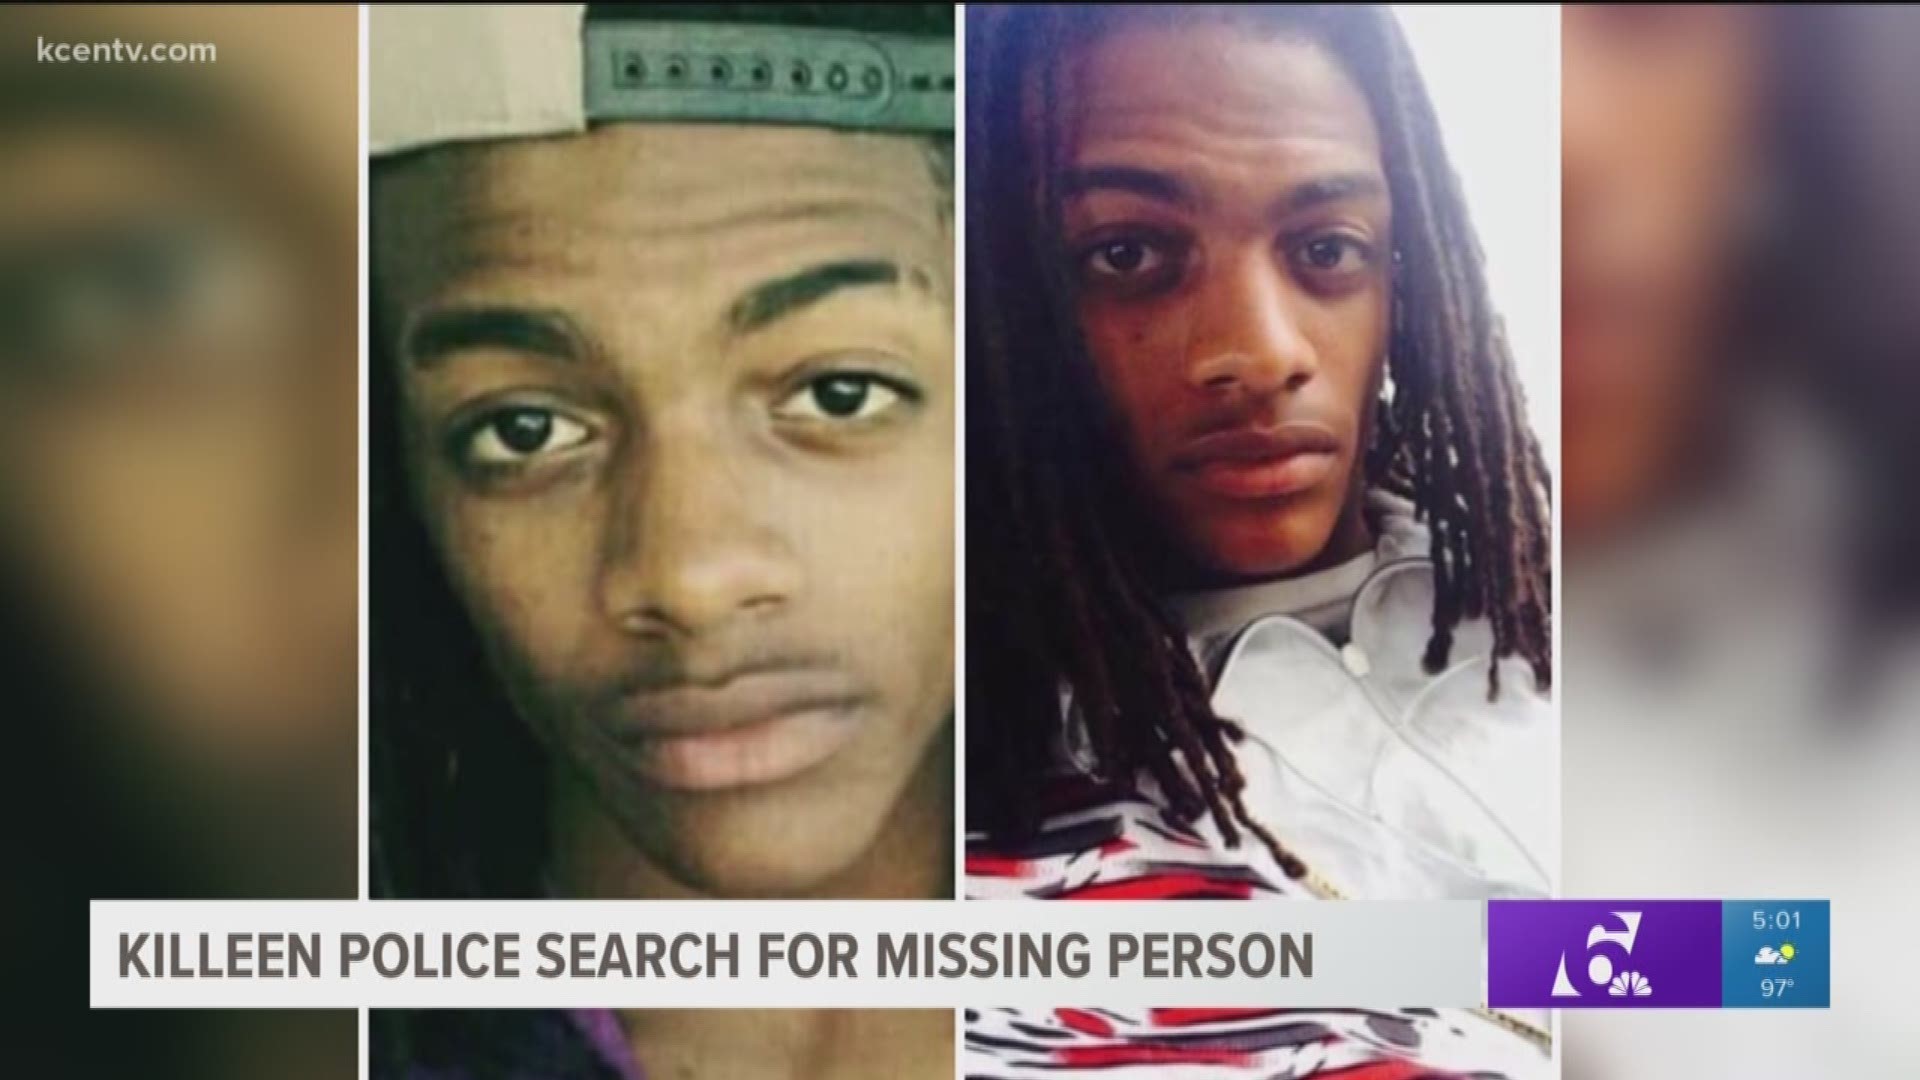 Police say Hasson Lindsey Jr. was last seen in Killeen July 10.